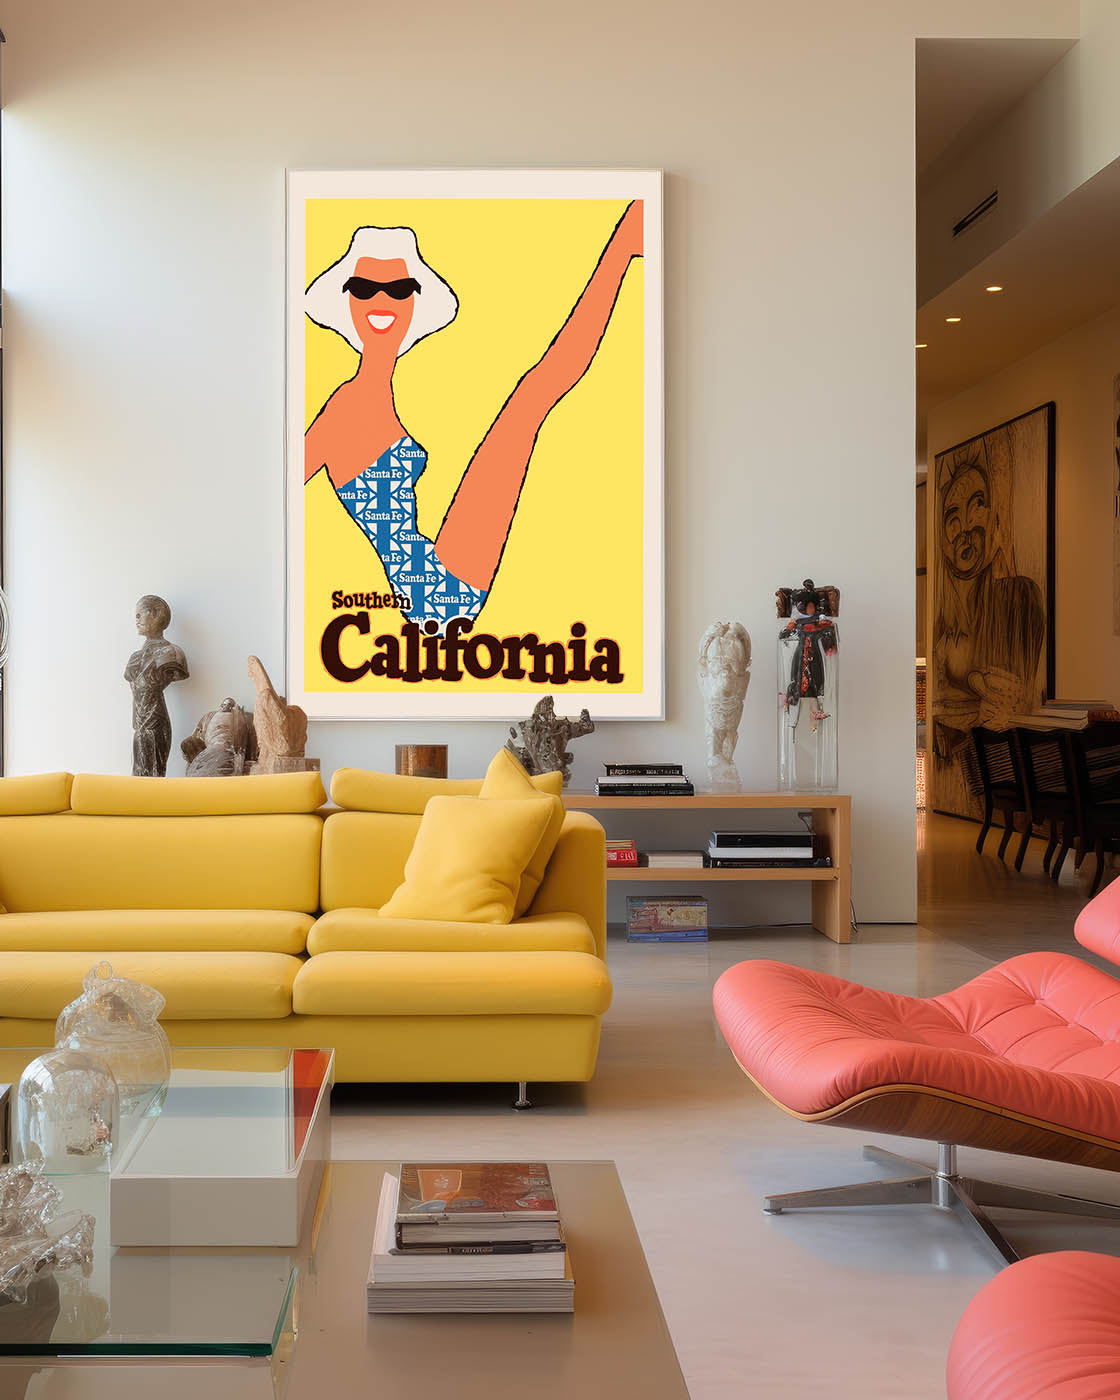 Southern California vintage poster